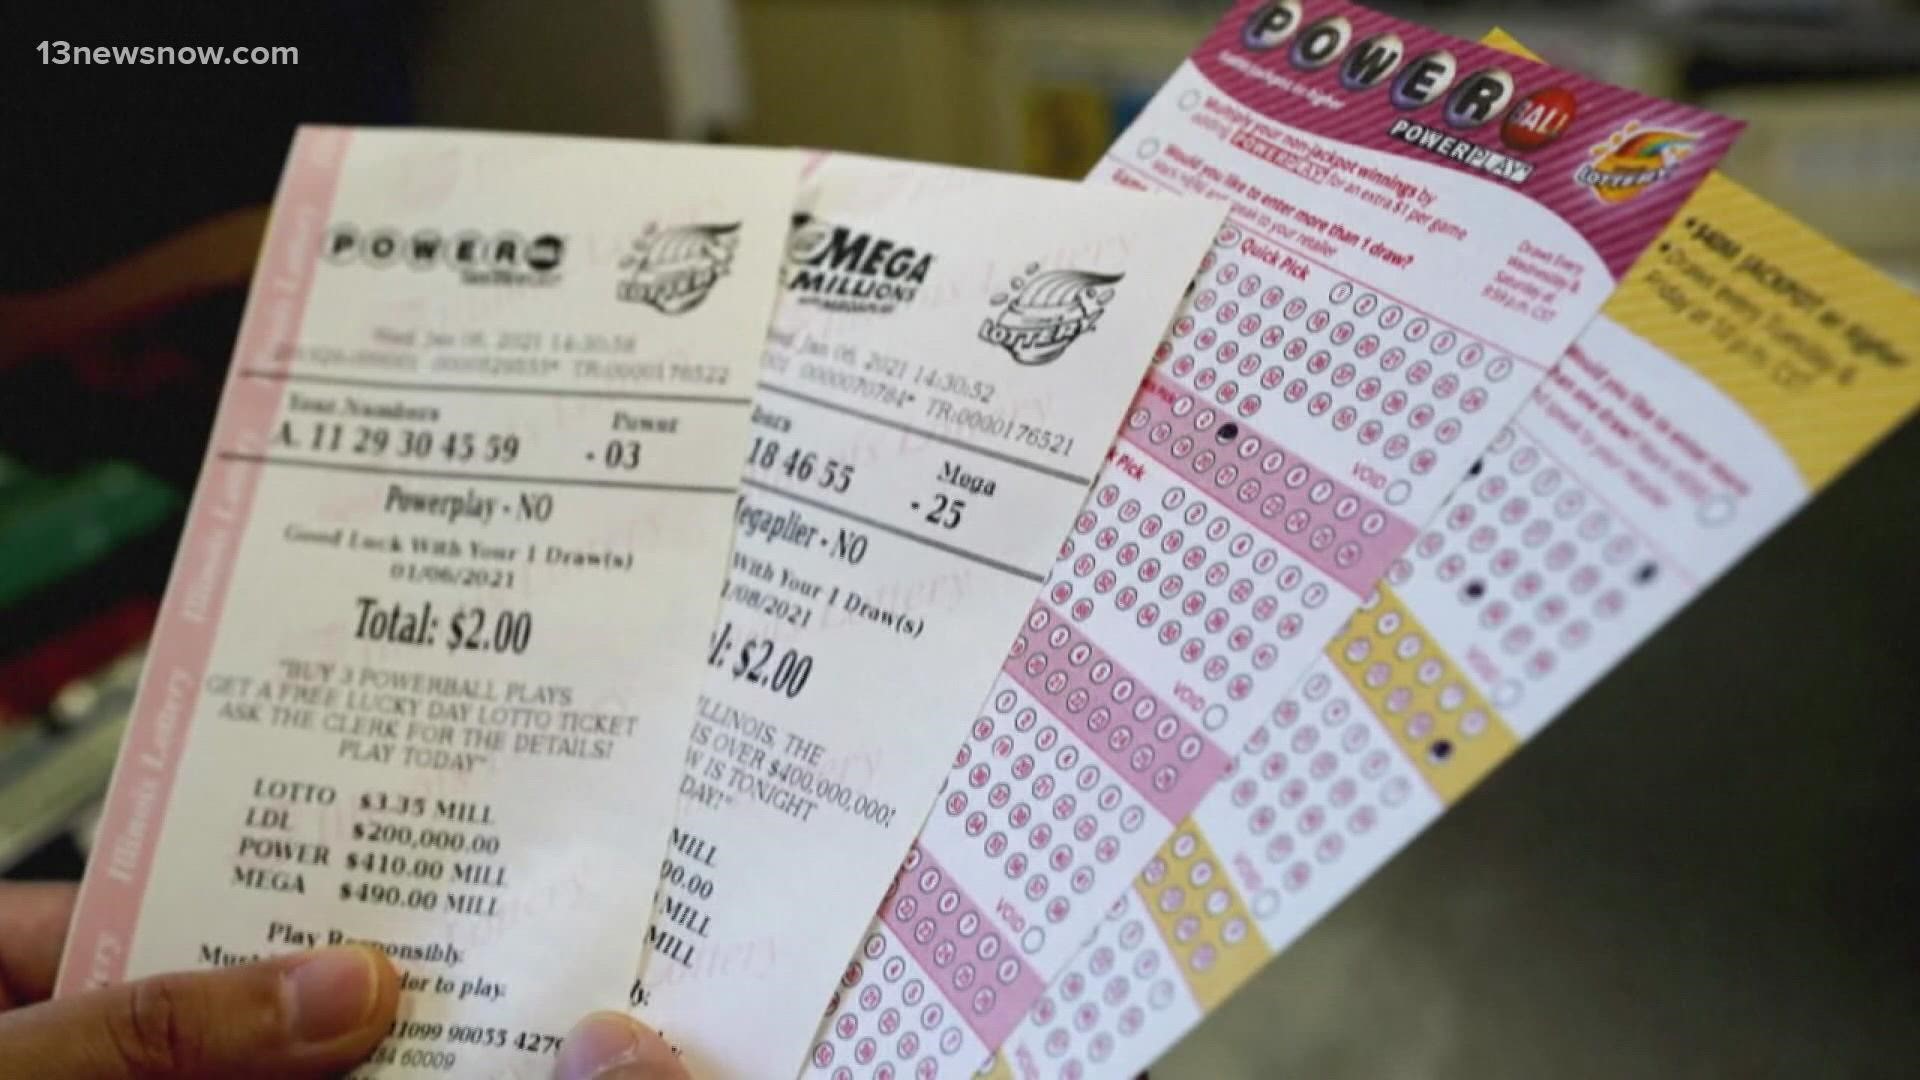 The next drawing for a whopping $1.02 billion is this Friday.